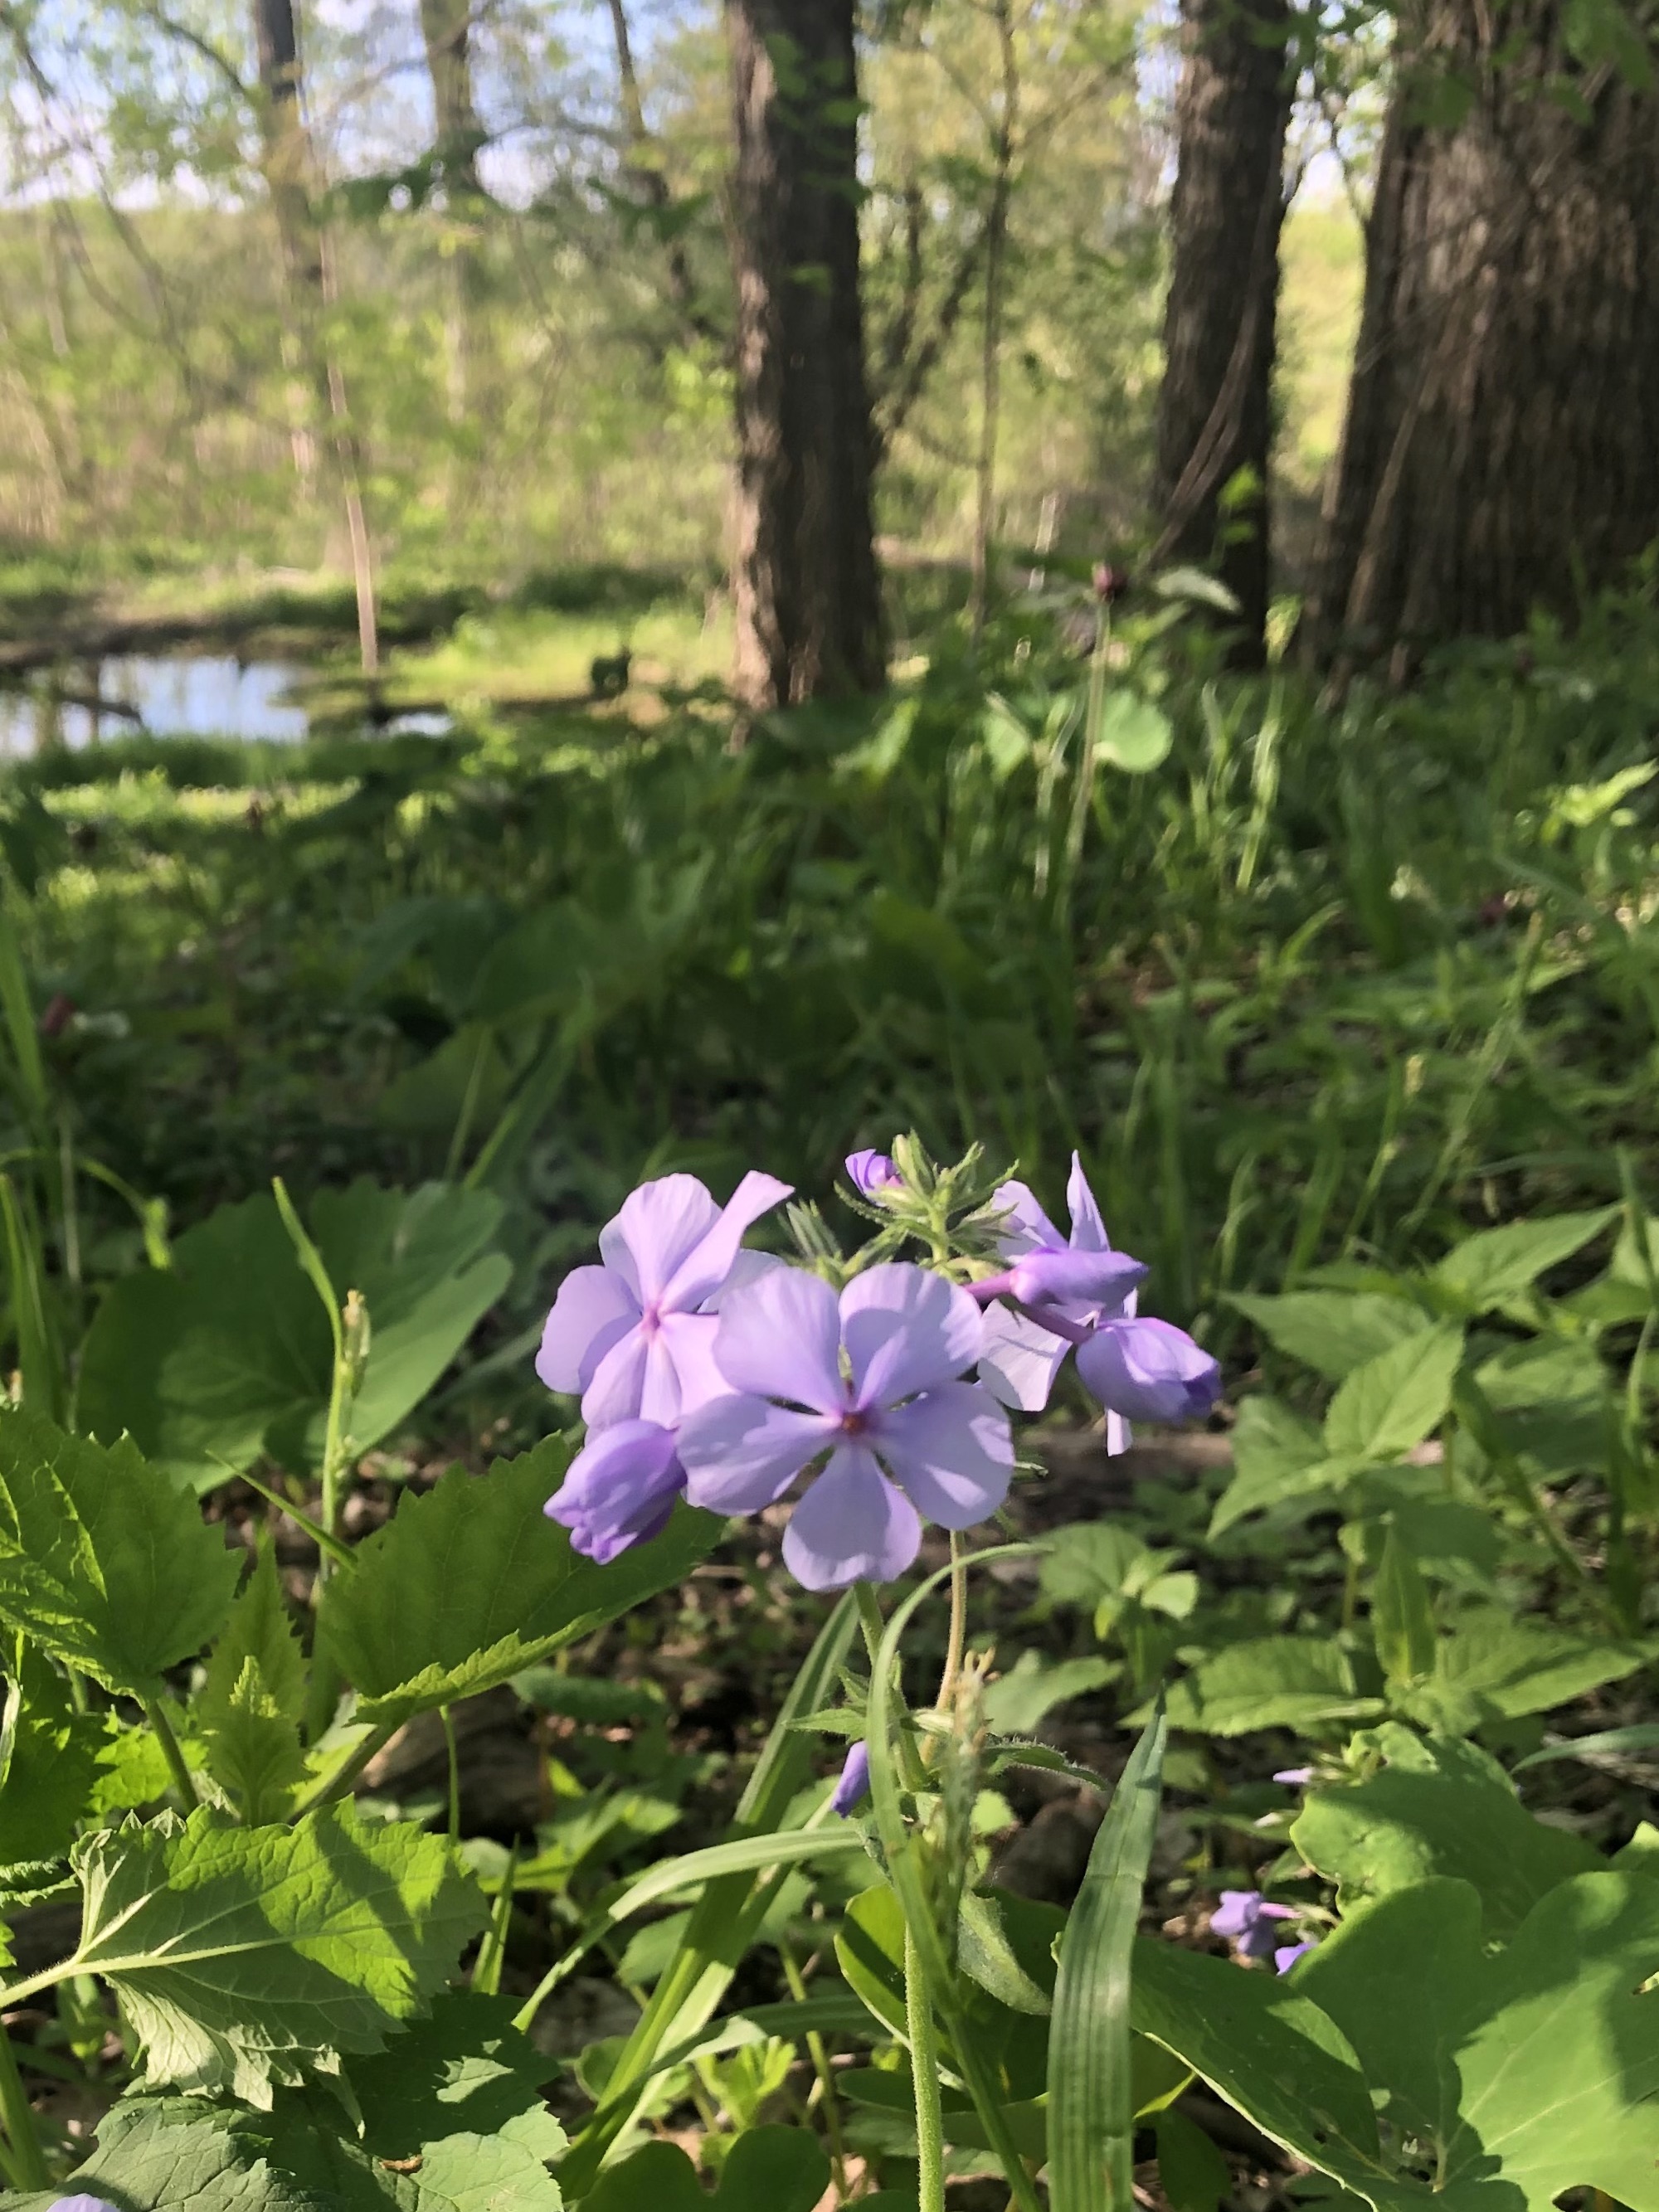 Woodland Phlox by Council Ring in Oak Savanna in Madison, Wisconsin  on May 15, 2022.